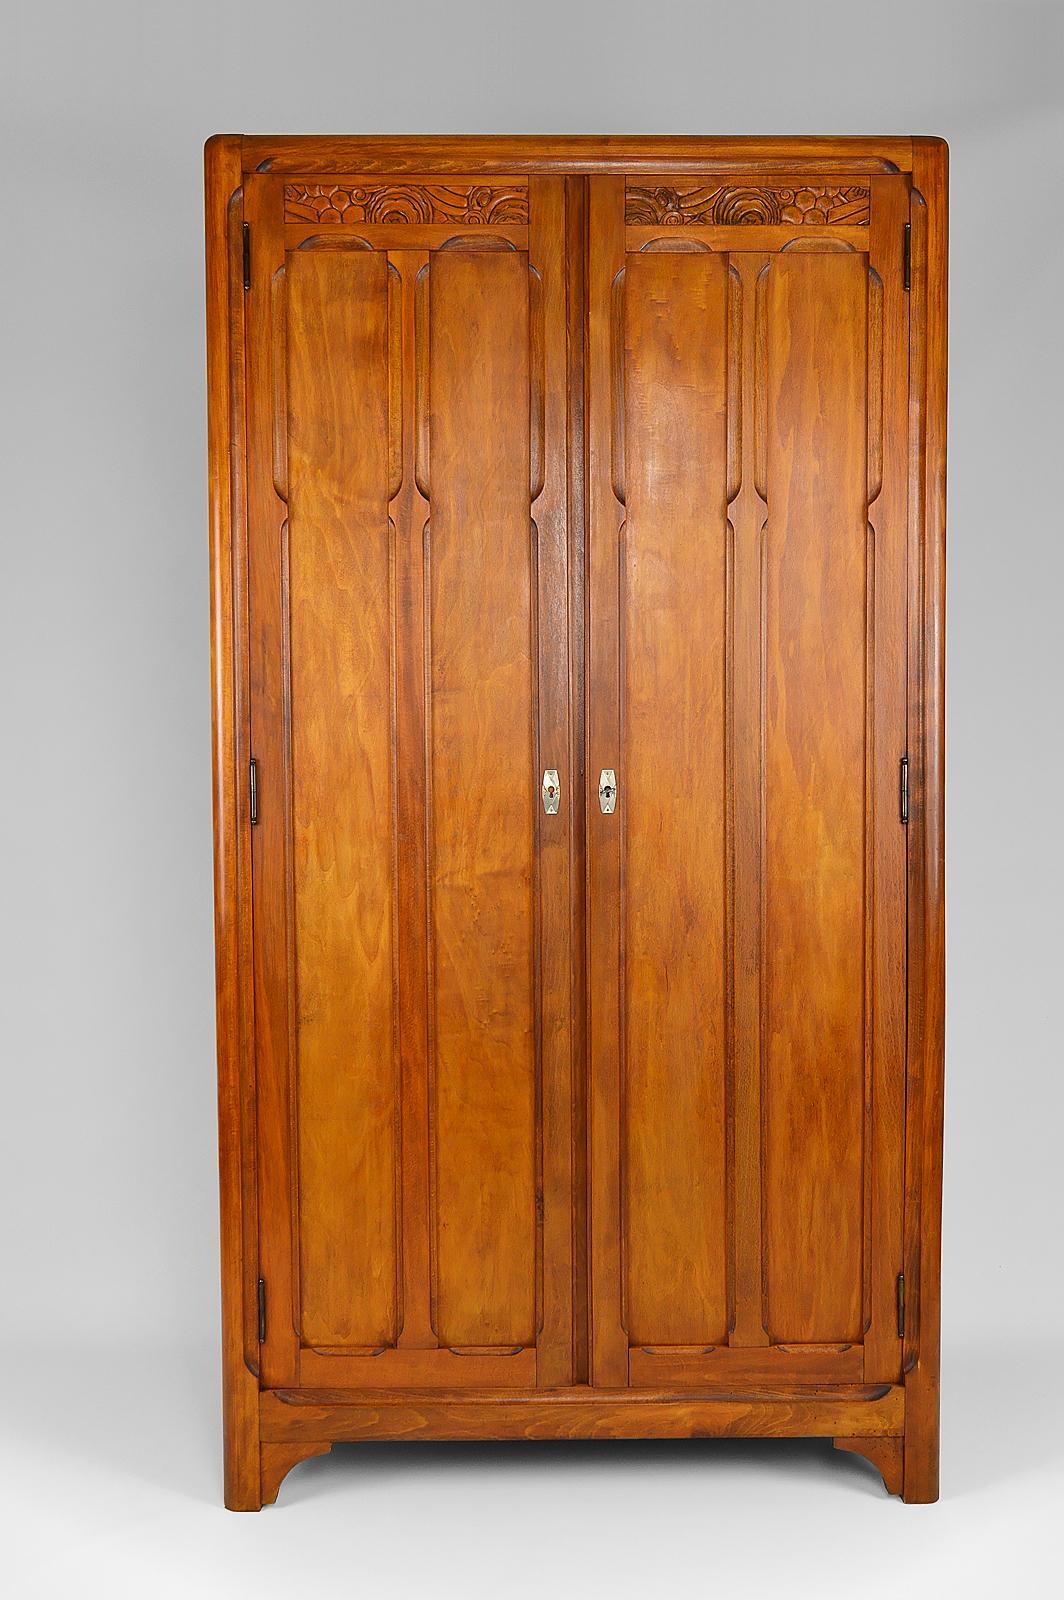 Elegant small cupboard / wardrobe / cabinet in beech wood. 

2 doors nicely carved with stylized flowers and fruits, typically Art Deco.
Chrome / nickel escutcheons.
Inside, a shelf and a clothes rack bar.

Art Deco style, France, circa 1930.

In